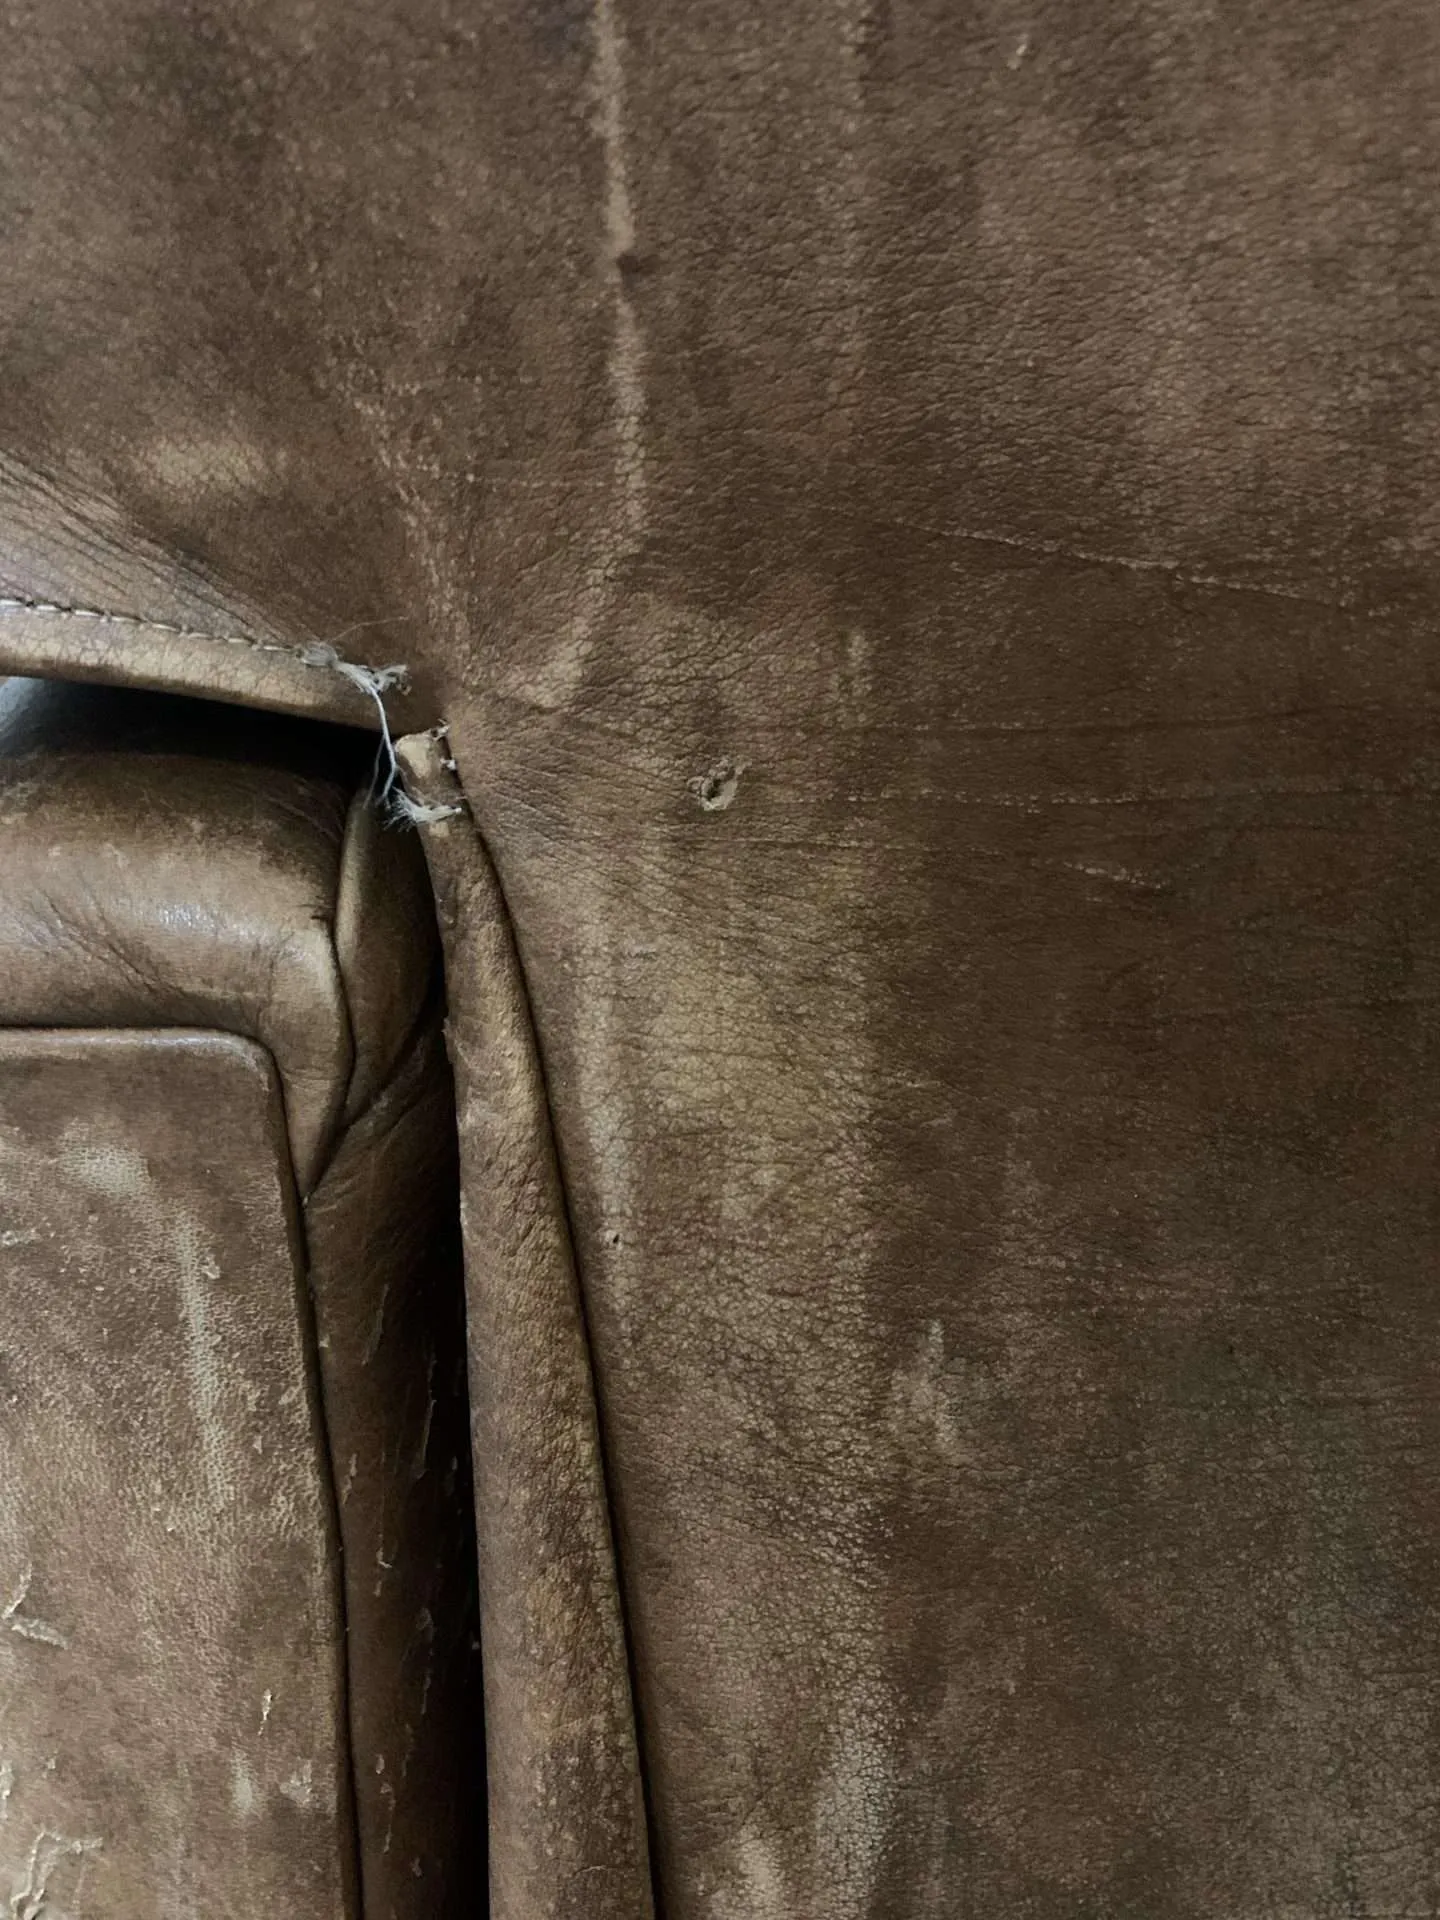 Filling in a hole in a leather chair.